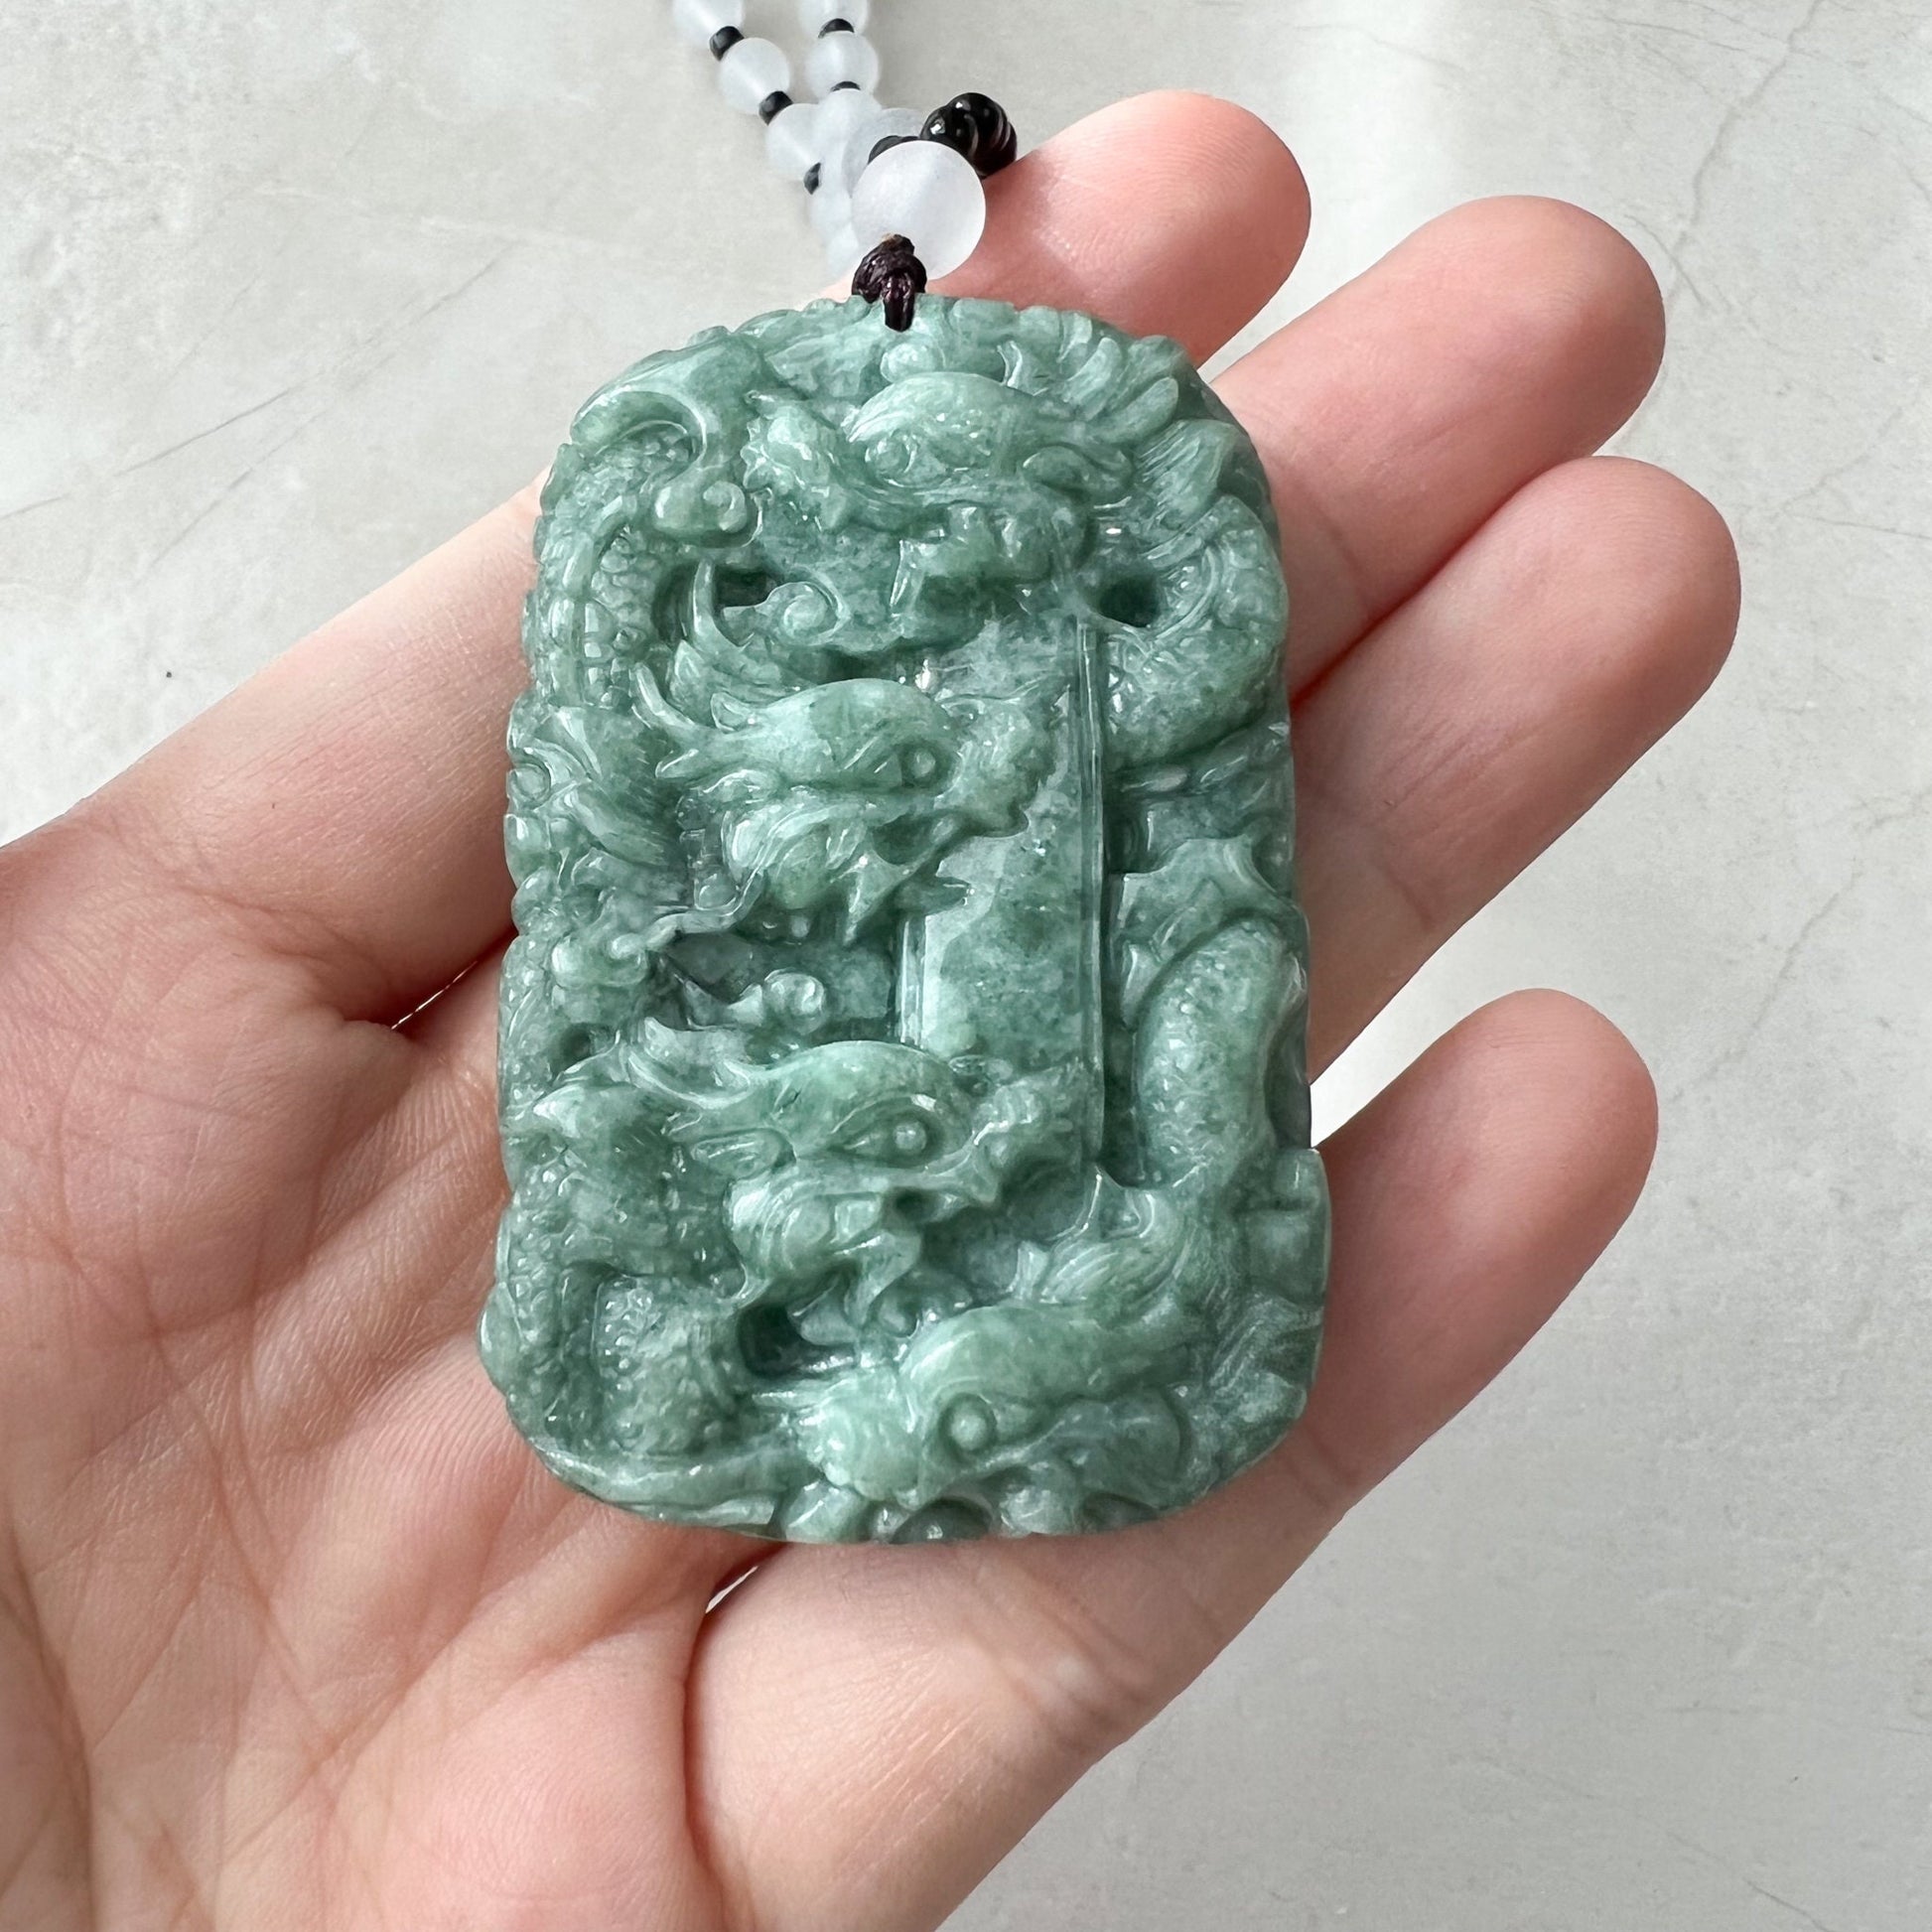 Green Jade 9 Dragon Jadeite Jade Chinese Zodiac Hand Carved Pendant Necklace, YJ-1221-0233671 - AriaDesignCollection